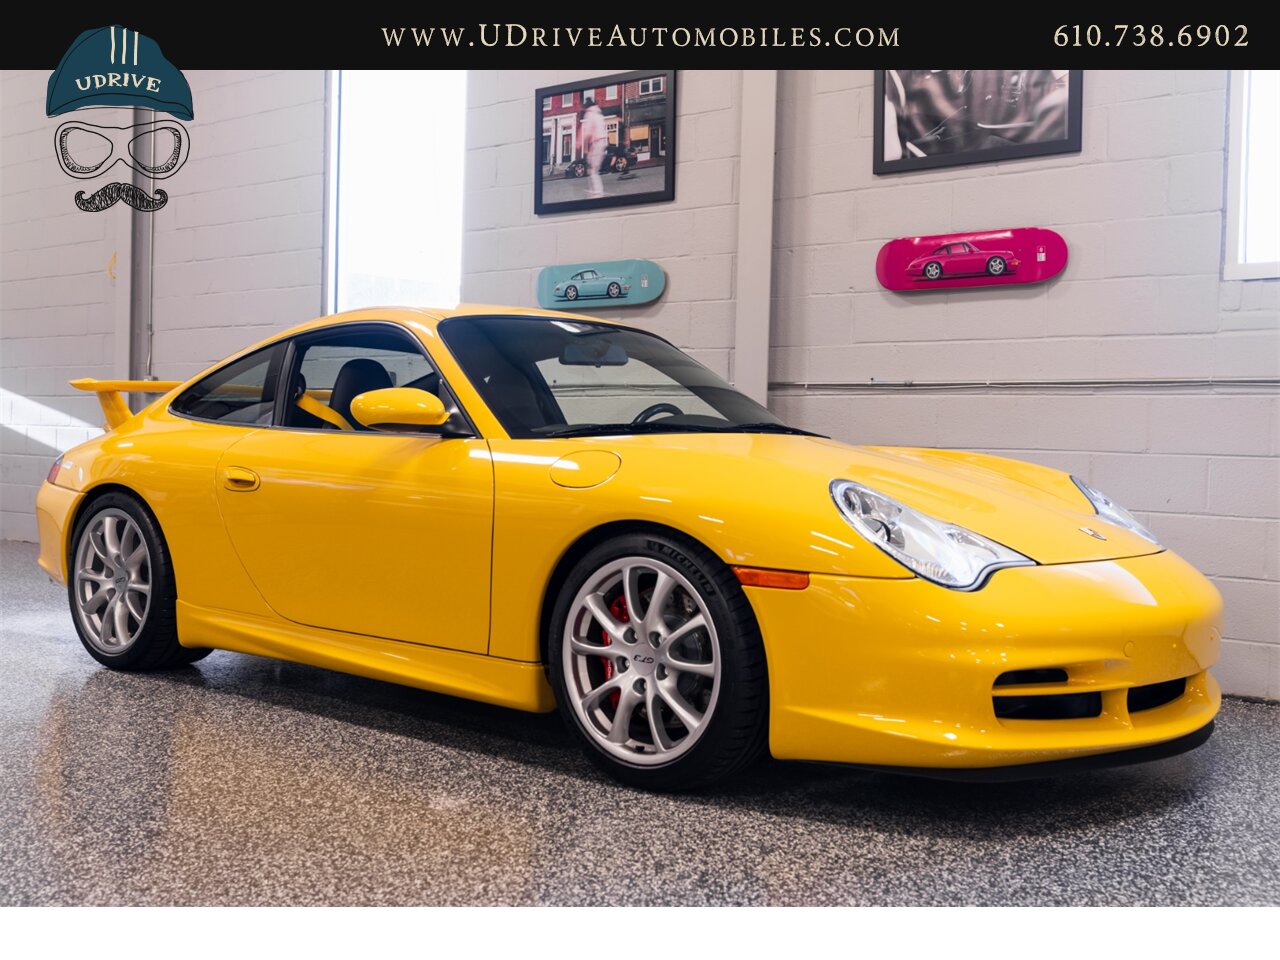 2005 Porsche 911 GT3 996 Speed Yellow Sport Seats Pntd Hardbacks  Pntd Console Deviating Stitch Yellow Accents Throughout - Photo 16 - West Chester, PA 19382